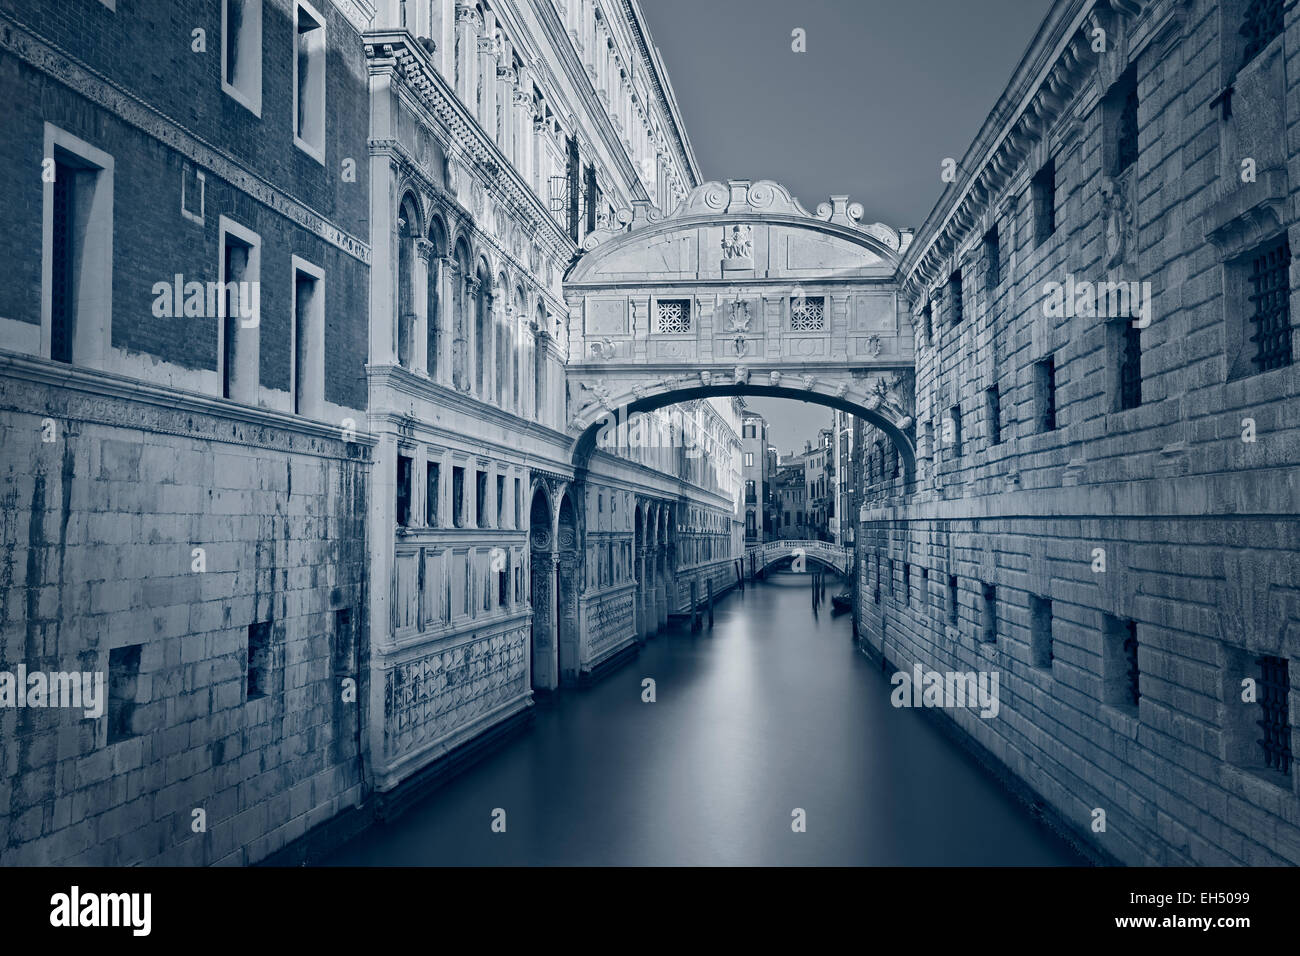 Bridge of Sighs. Toned image of the famous Bridge of Sighs in Venice, Italy. Stock Photo